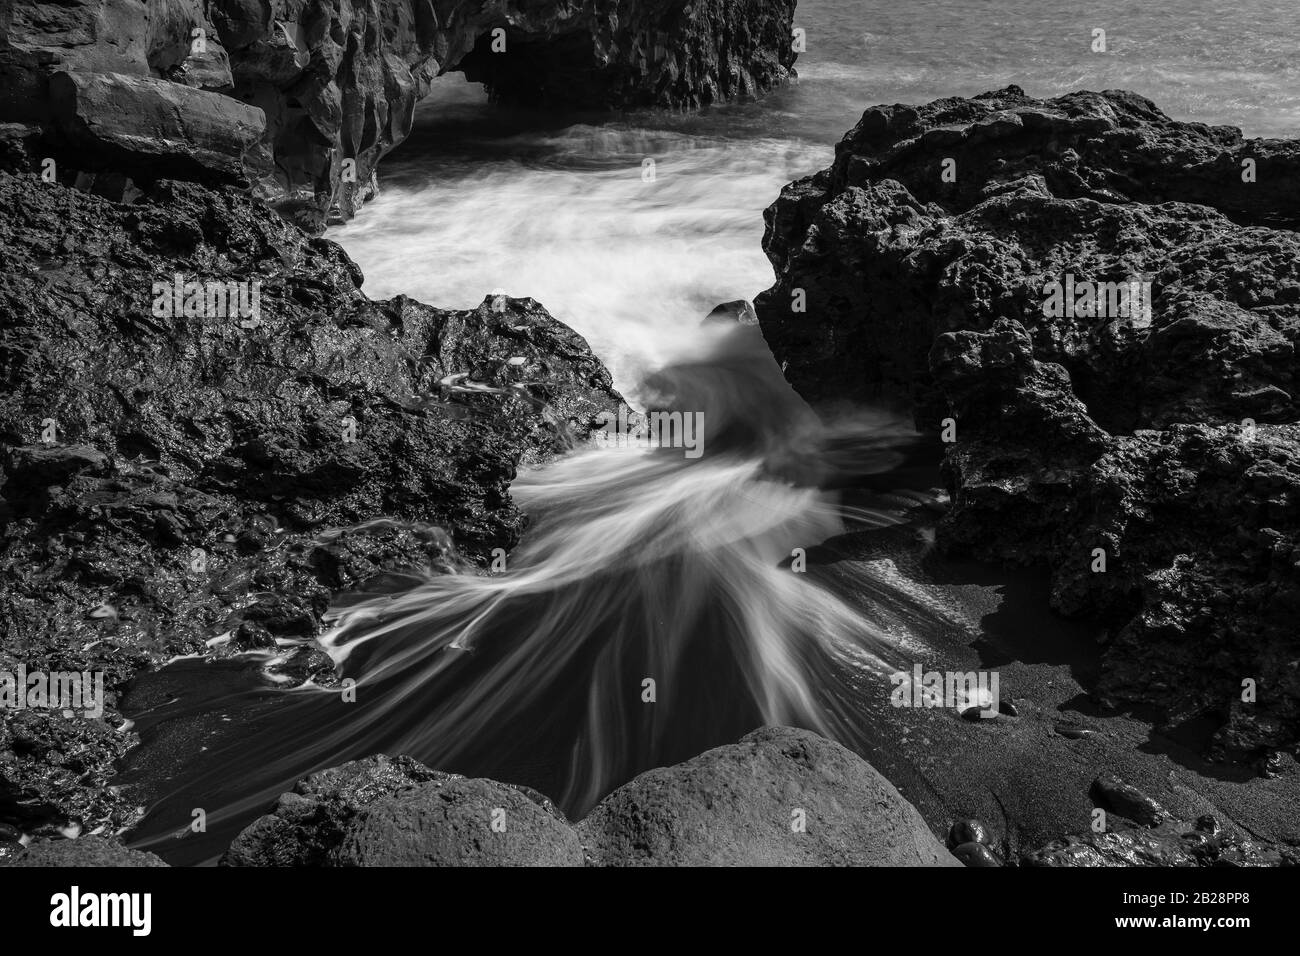 Water washes around stones, black lava sand, beach, black and white, La Palma, Canary Islands, Canary Islands, Spain Stock Photo